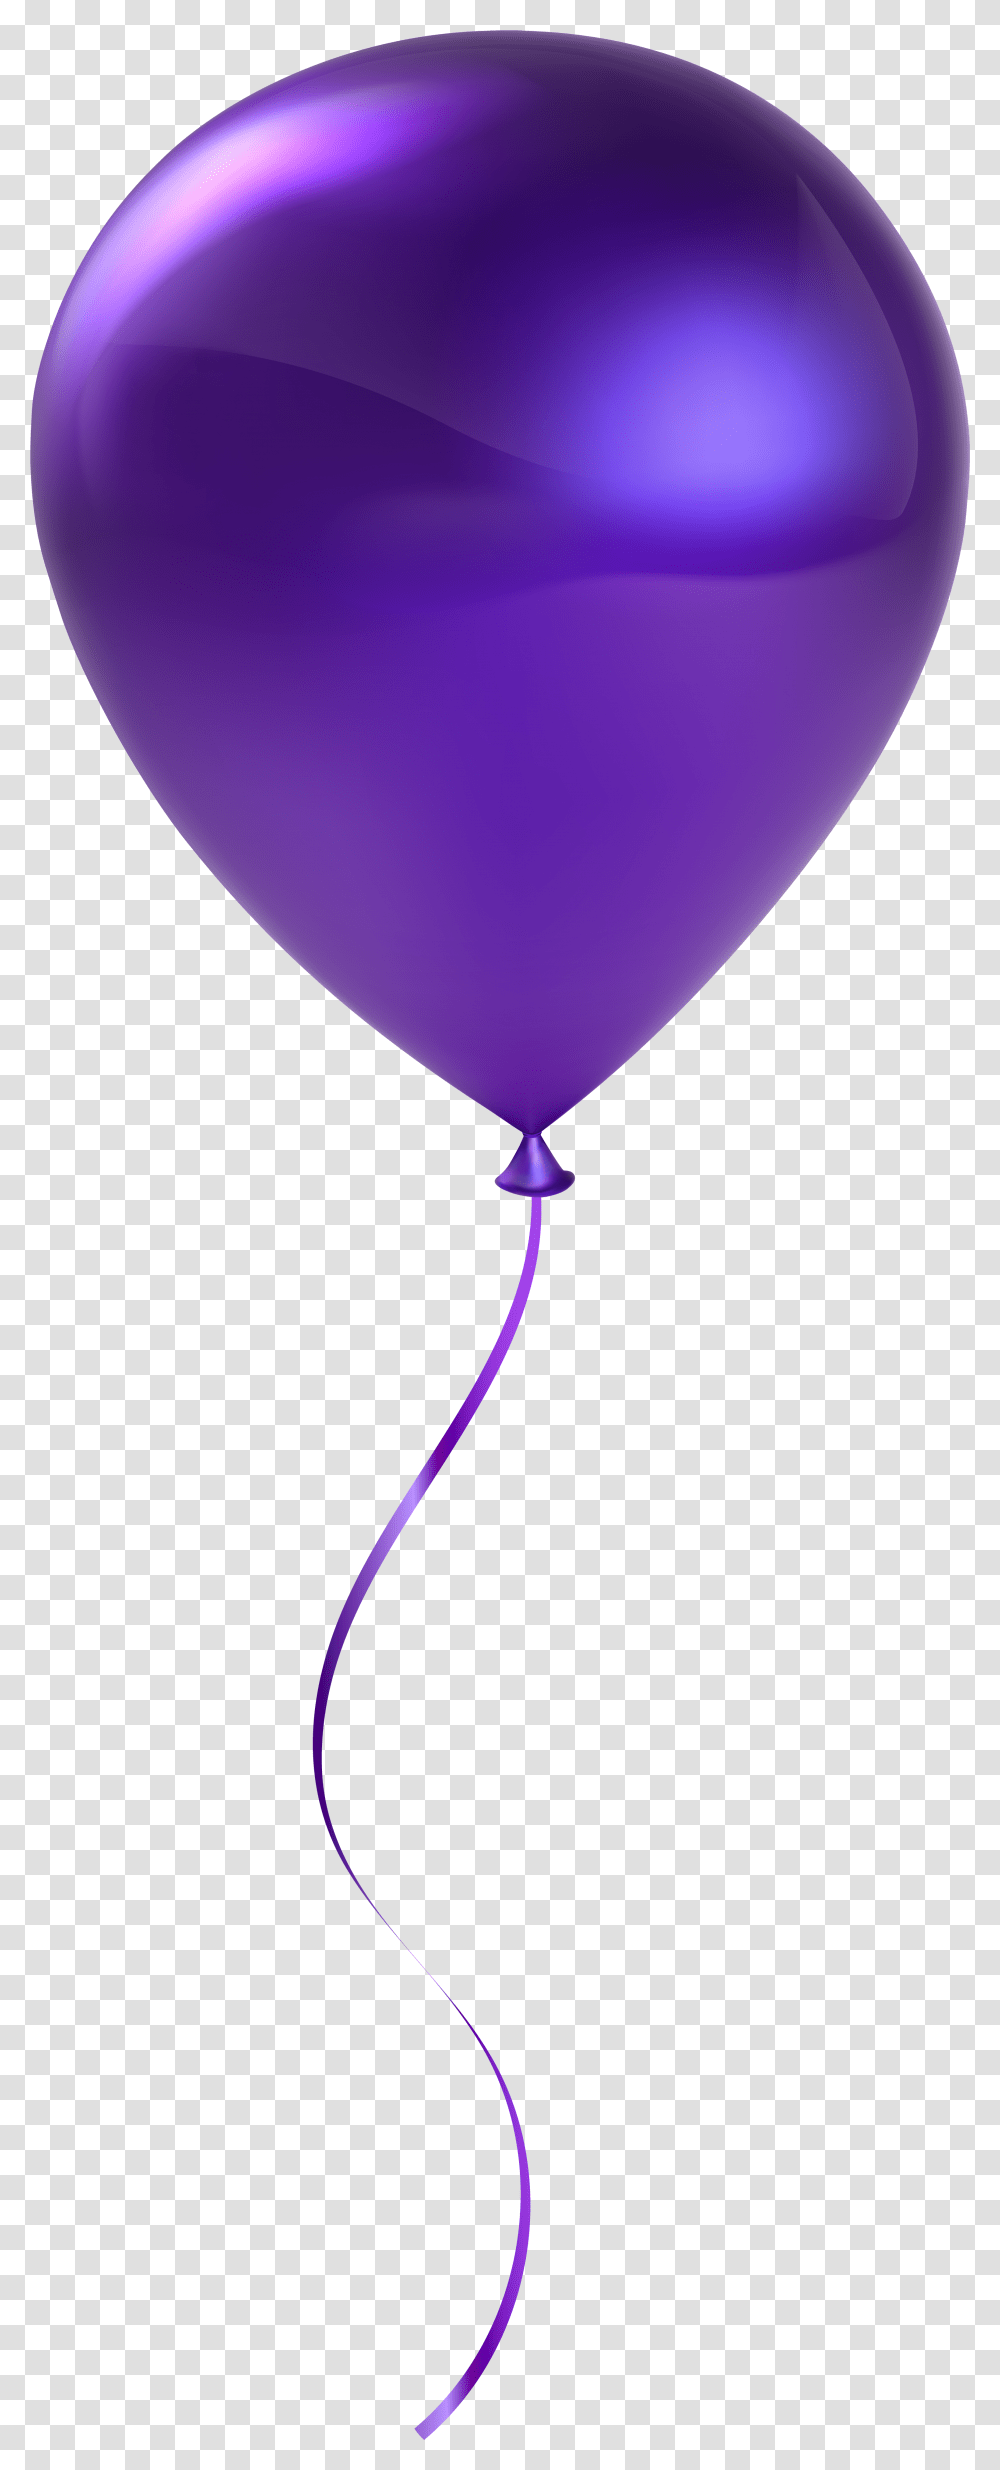 Clipart Balloons Violet Purple Balloon Background Transparent Png